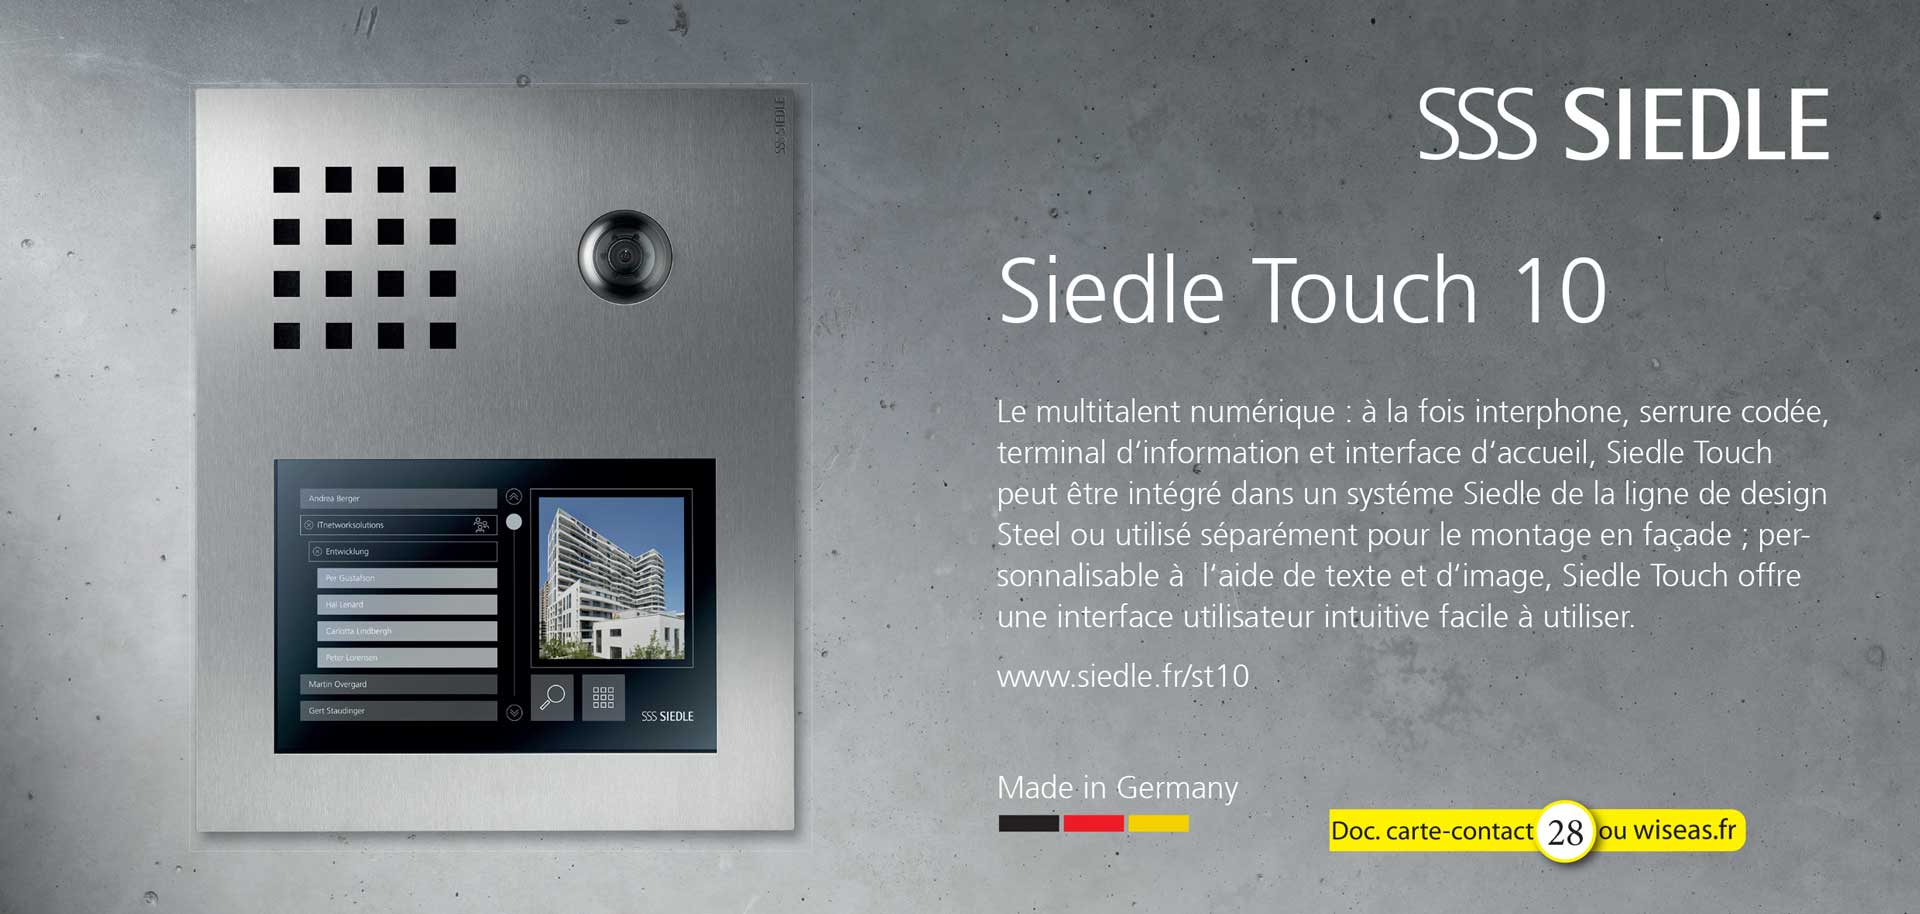 Siedle Touch 10